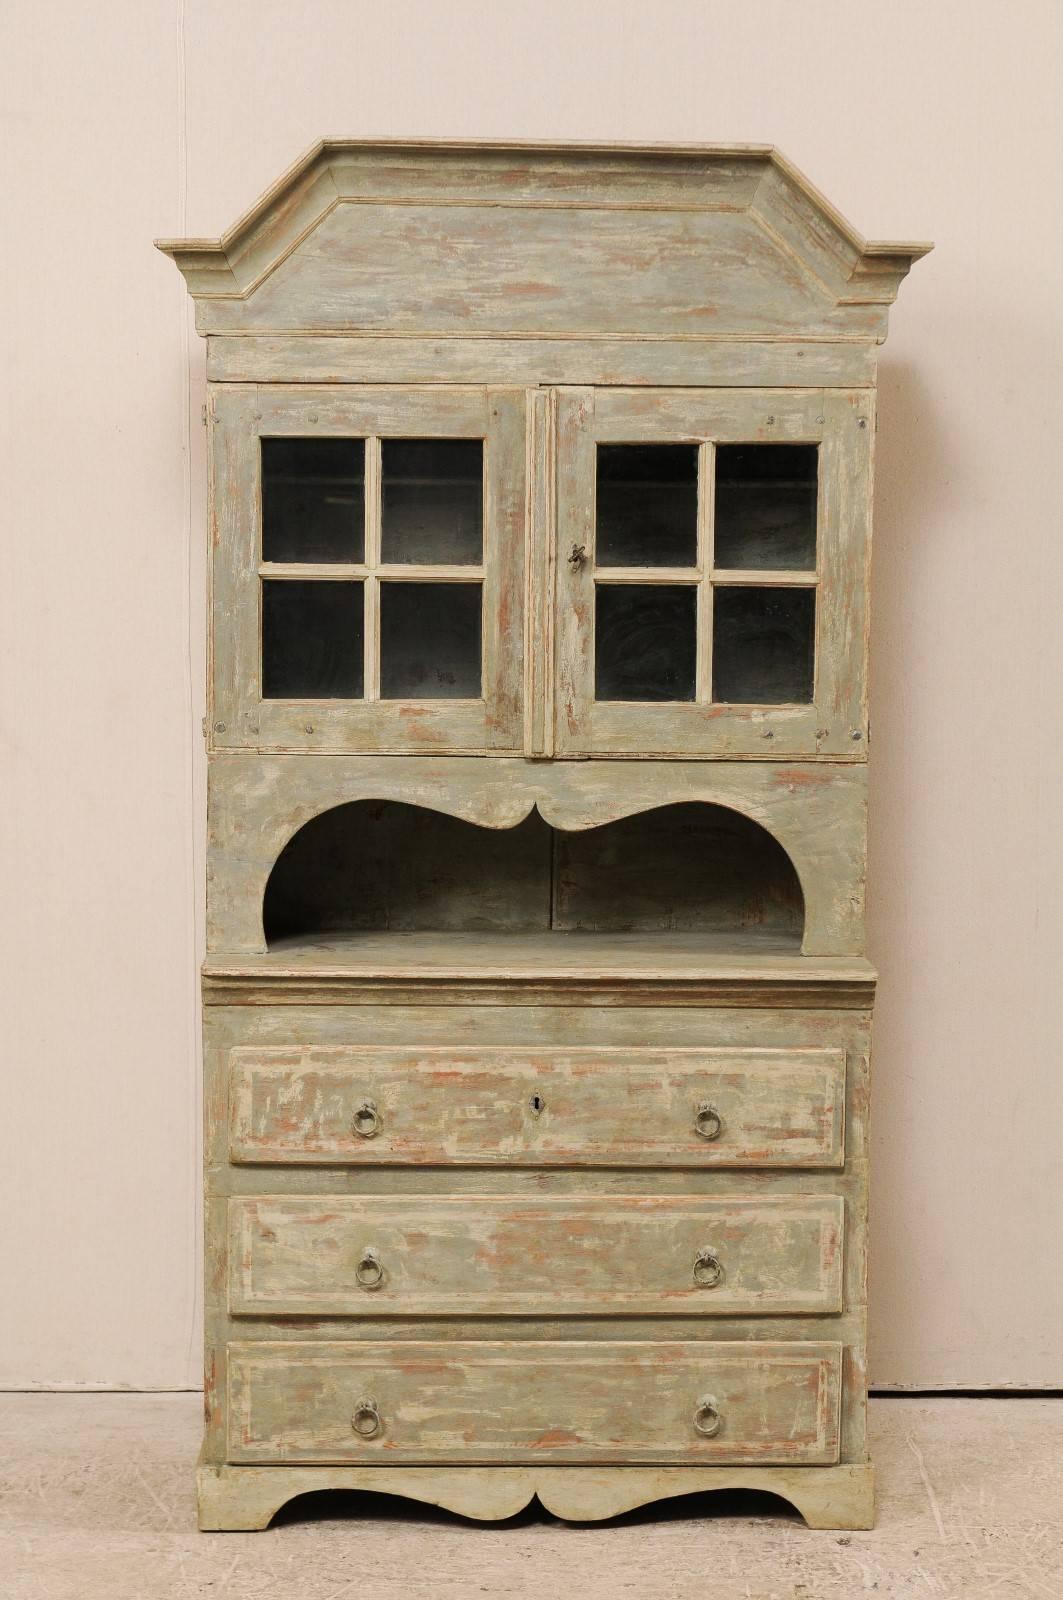 An early 19th century Swedish tall cabinet. This antique Swedish cupboard has a heavily molded pediment bonnet. There are two glass doors in the upper case, which sits recessed back over the lower case, comprised of three drawers. There is a shelf